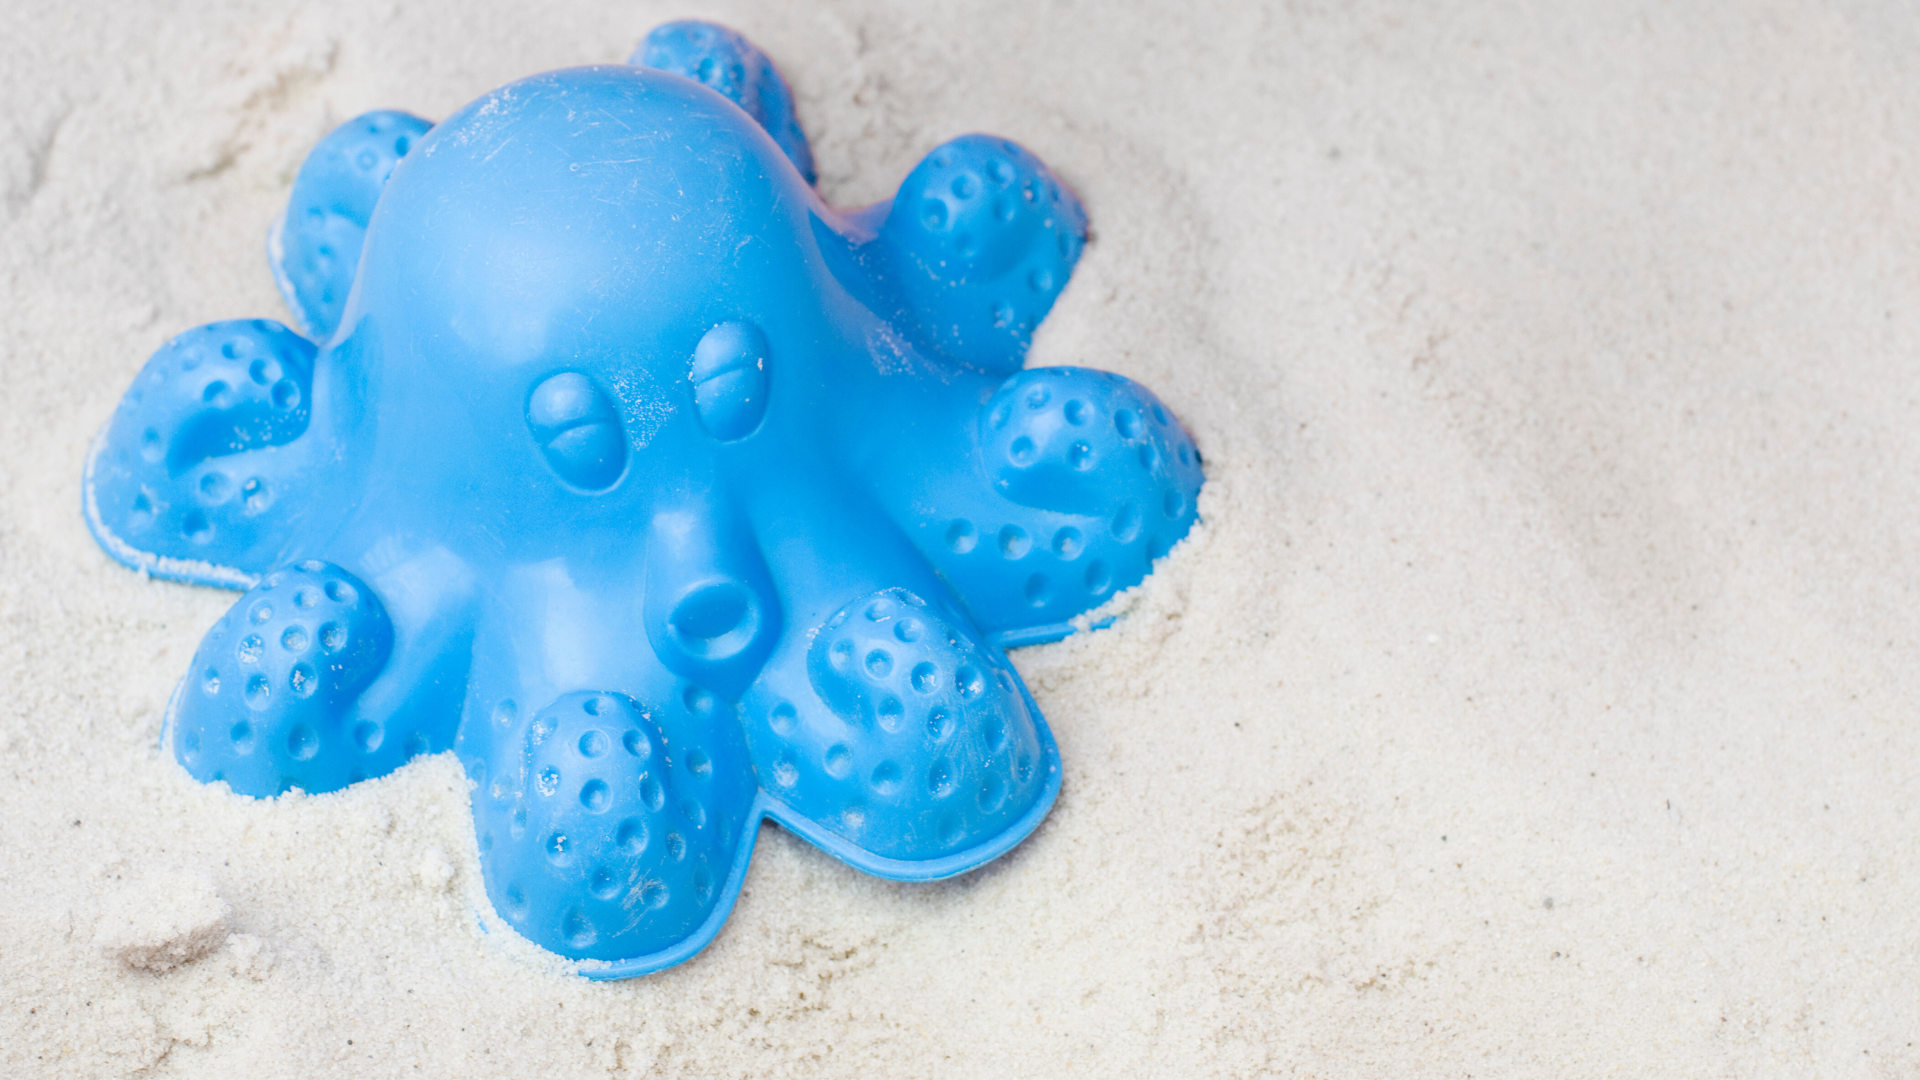 A blue plastic octopus sand castle mold with its mouth in the shape of an "o" sitting on a bed of soft white sand, presumably a beach.